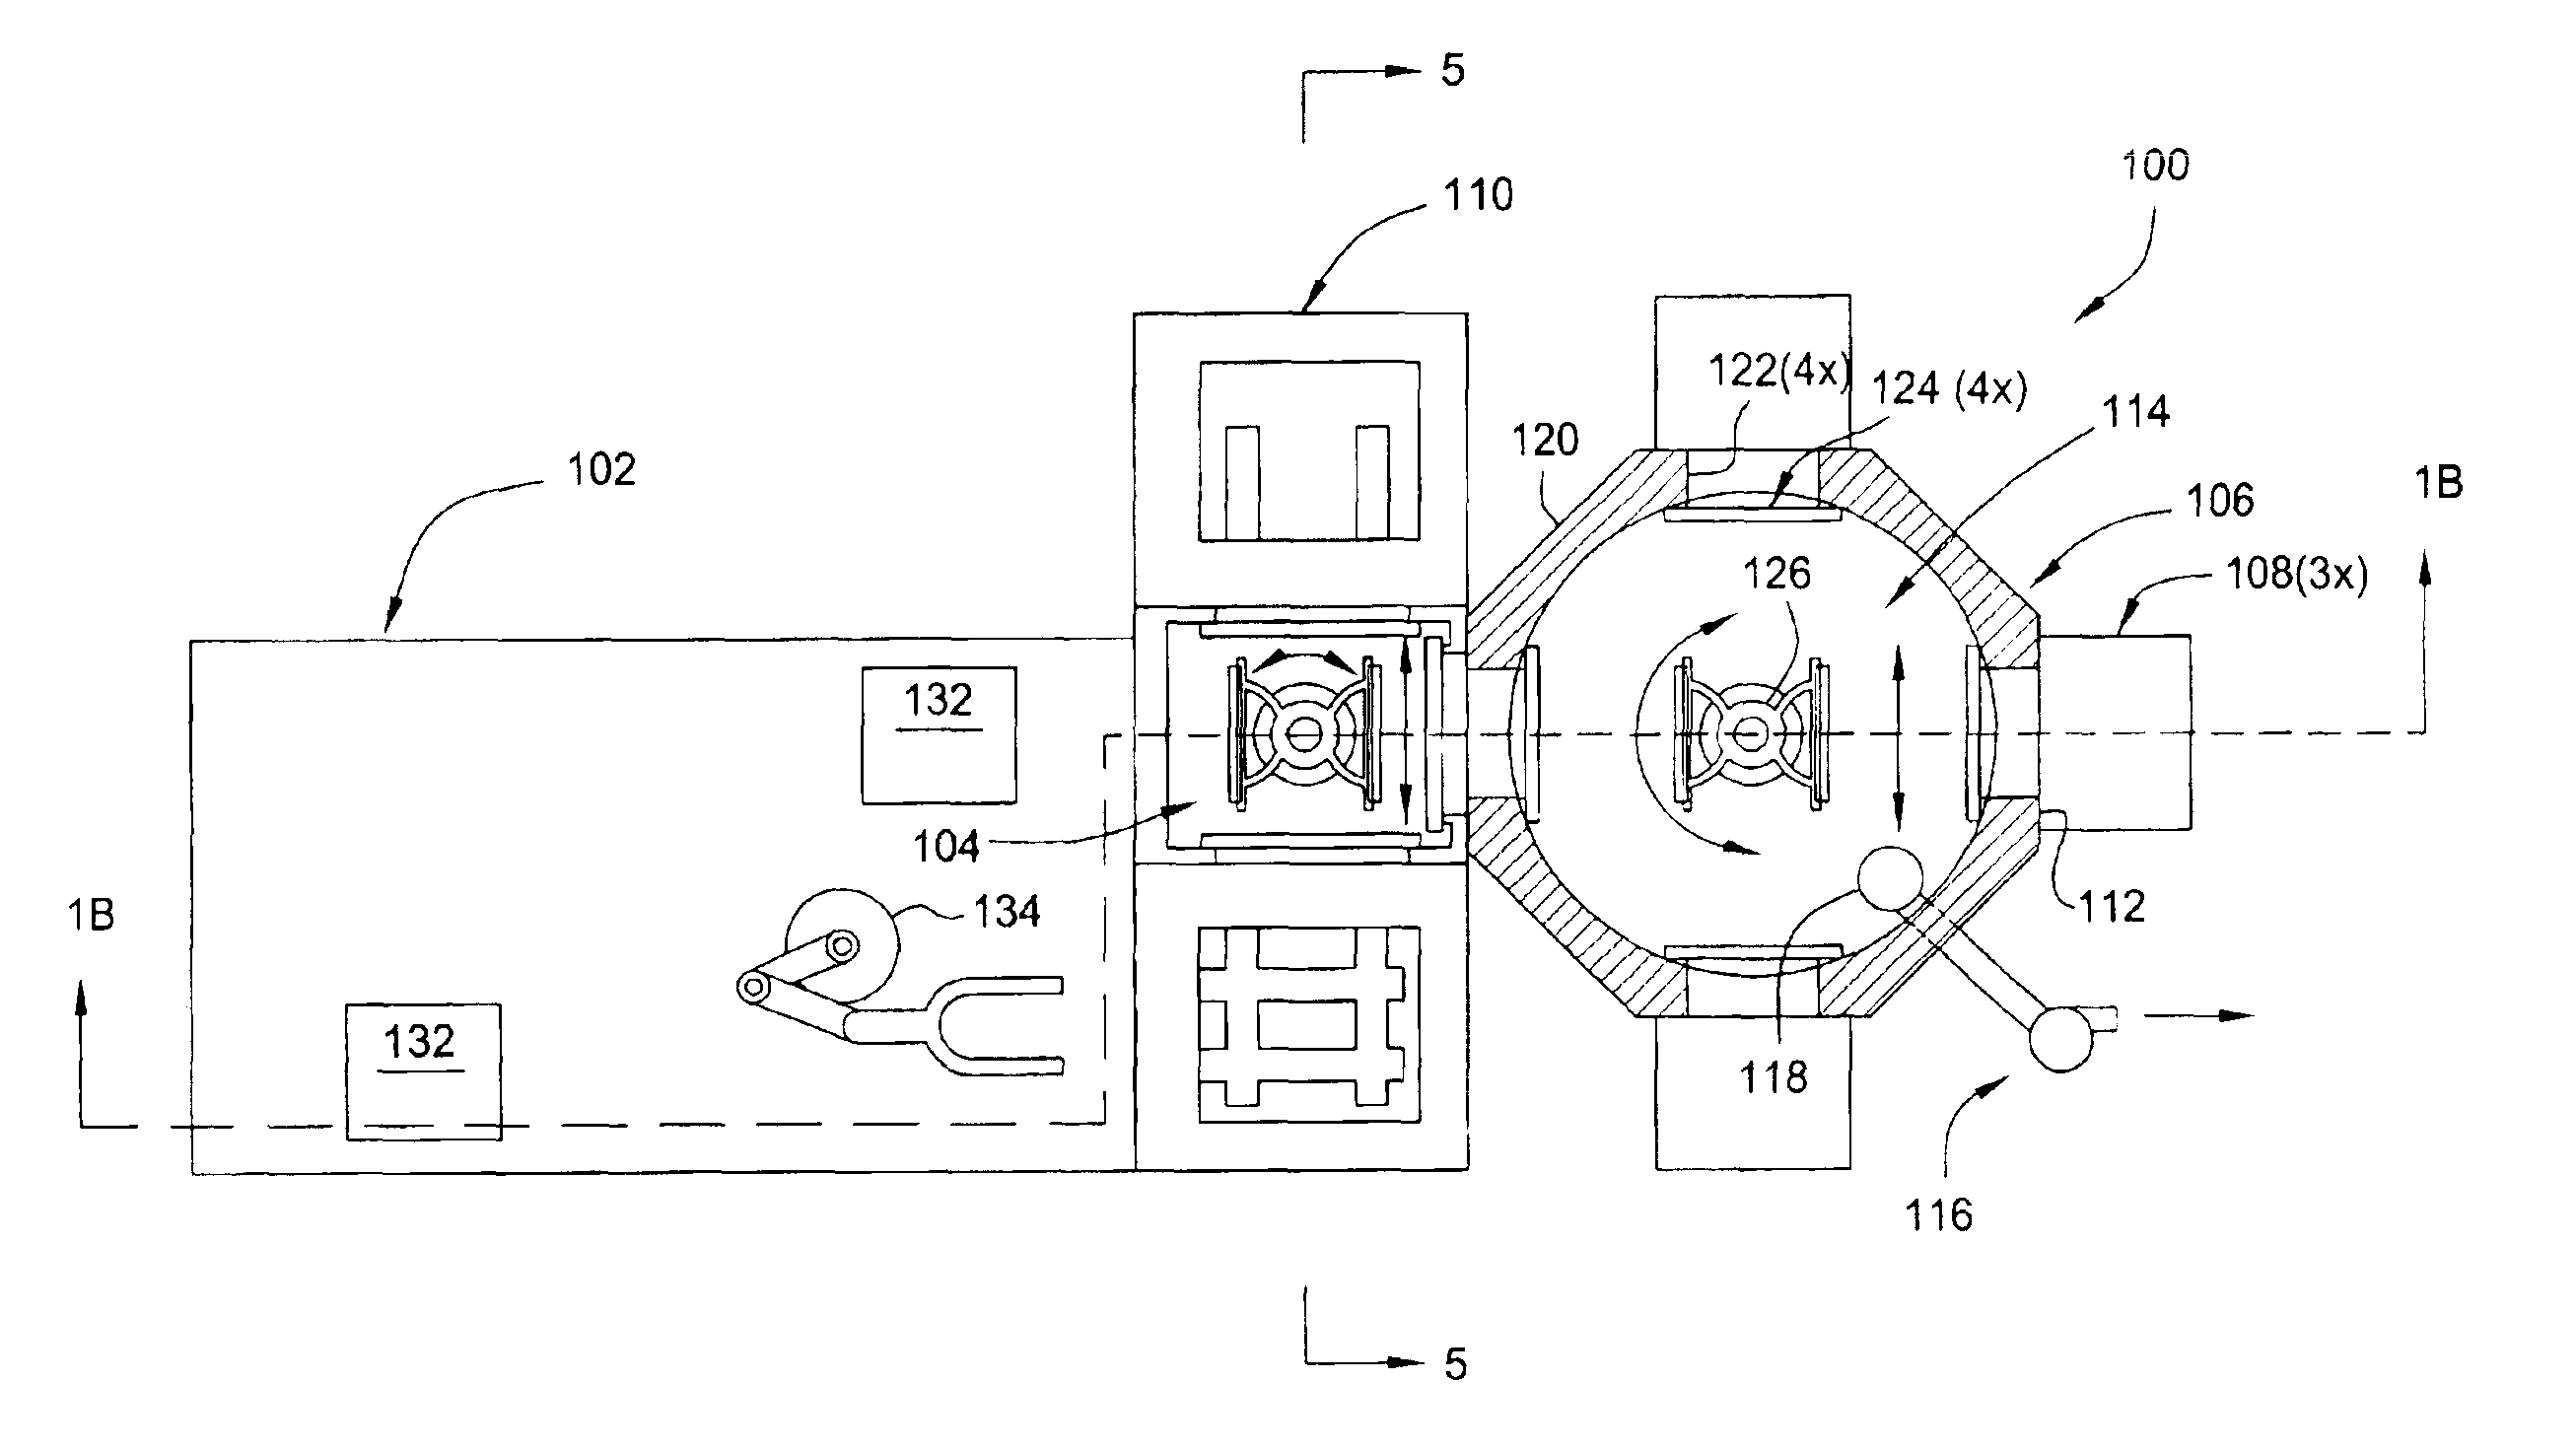 Large area substrate processing system